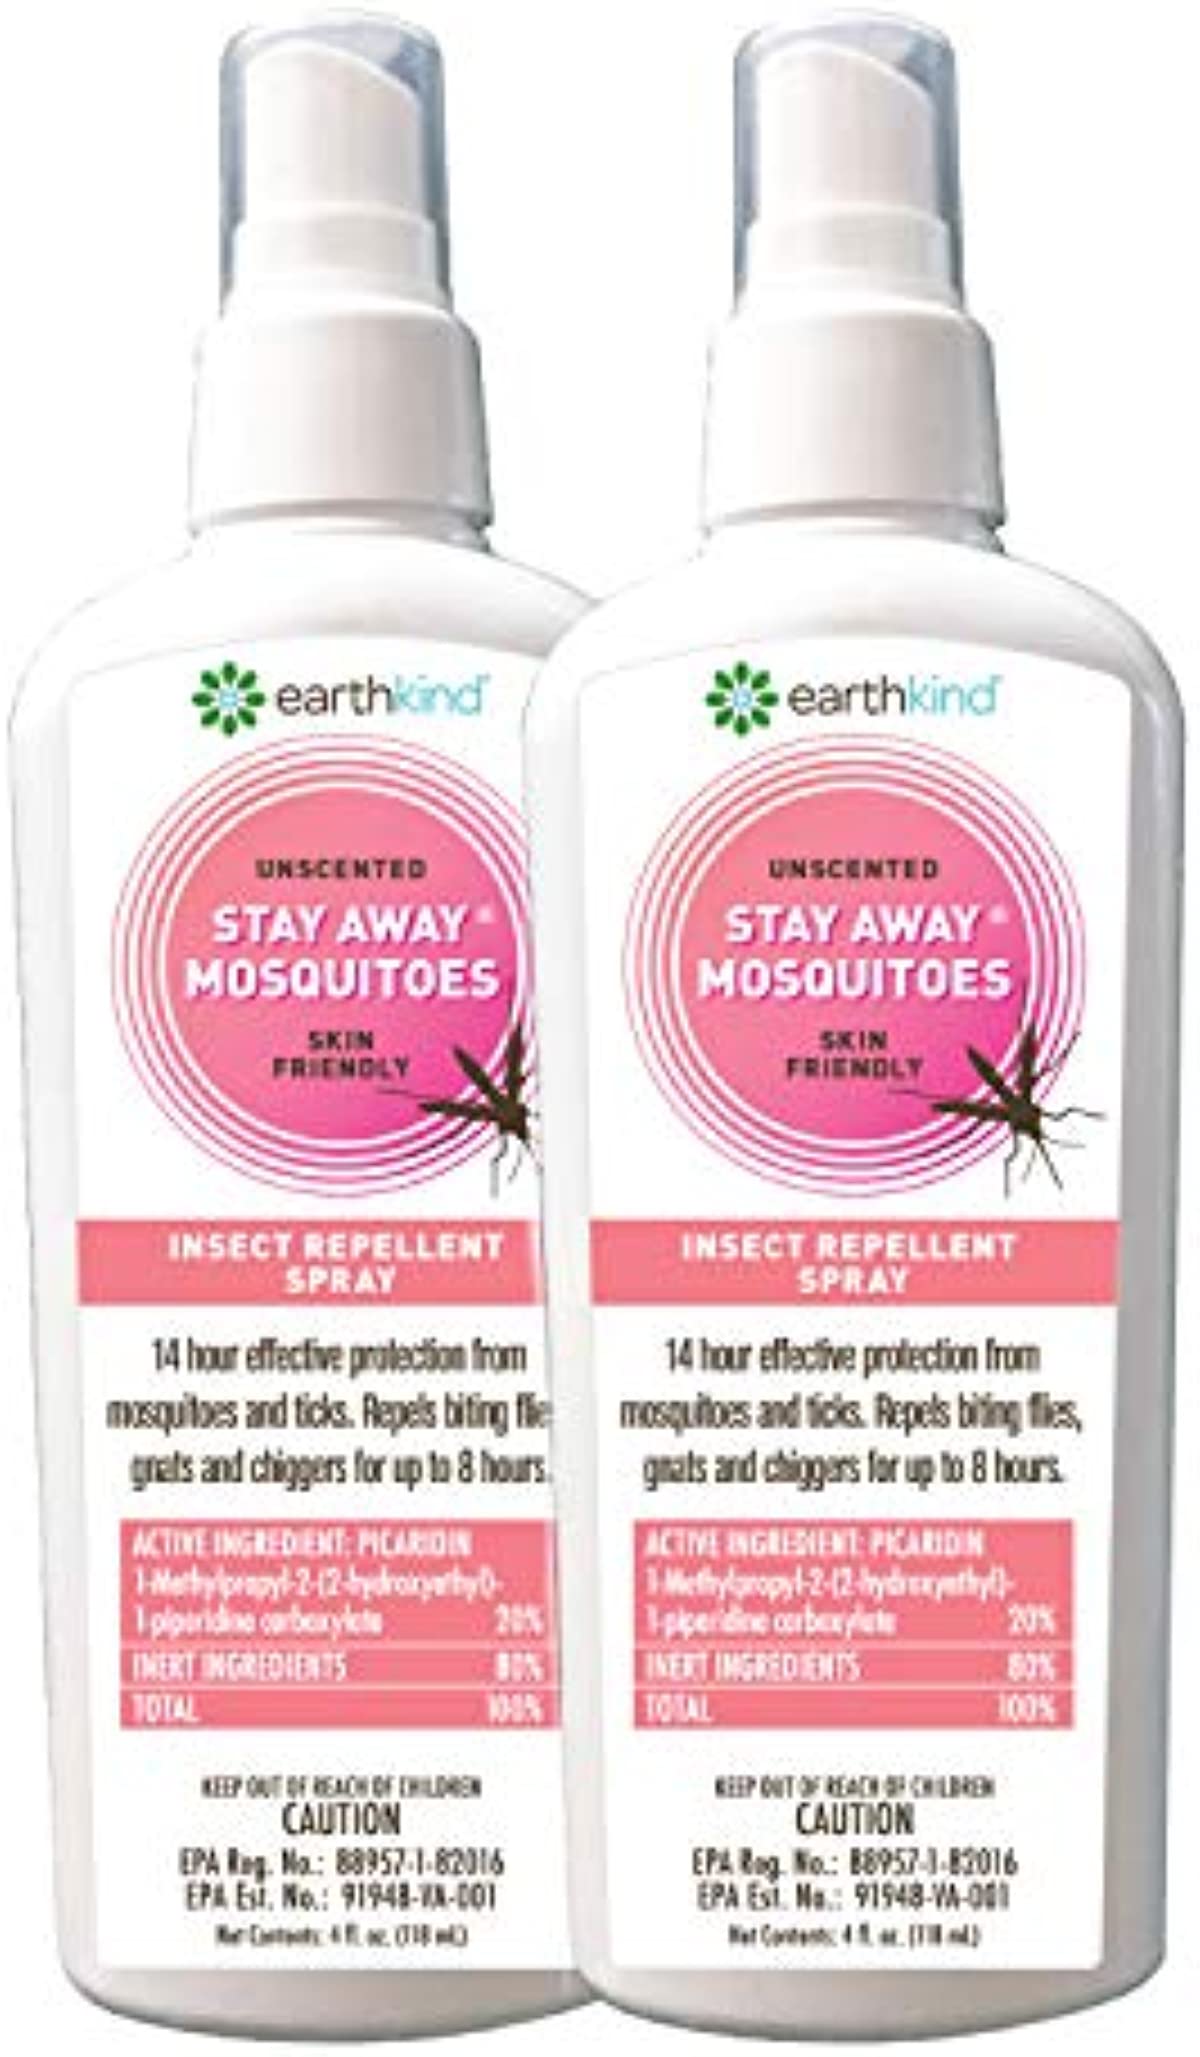 Stay Away Picaridin Mosquitoes Insect Repellent Unscented Spray - All Natural, Environmentally Friendly, No Mess, Standard Size 4-Ounce (2-Pack)